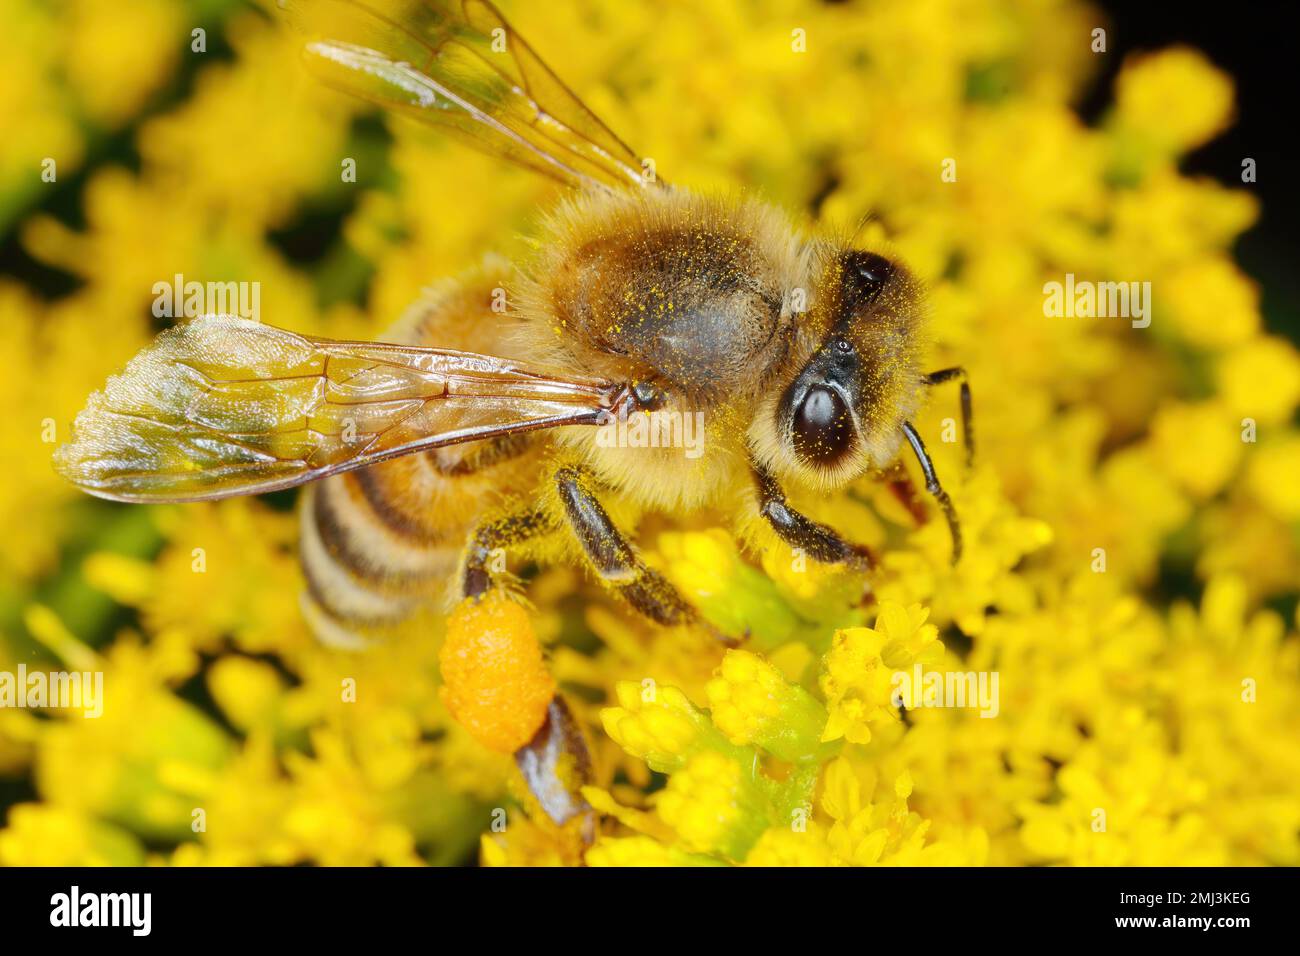 Honey Bee or also honeybee, Apis mellifera collecting pollen of flower Canada goldenrod or Canadian goldenrod, Solidago canadensis. Stock Photo